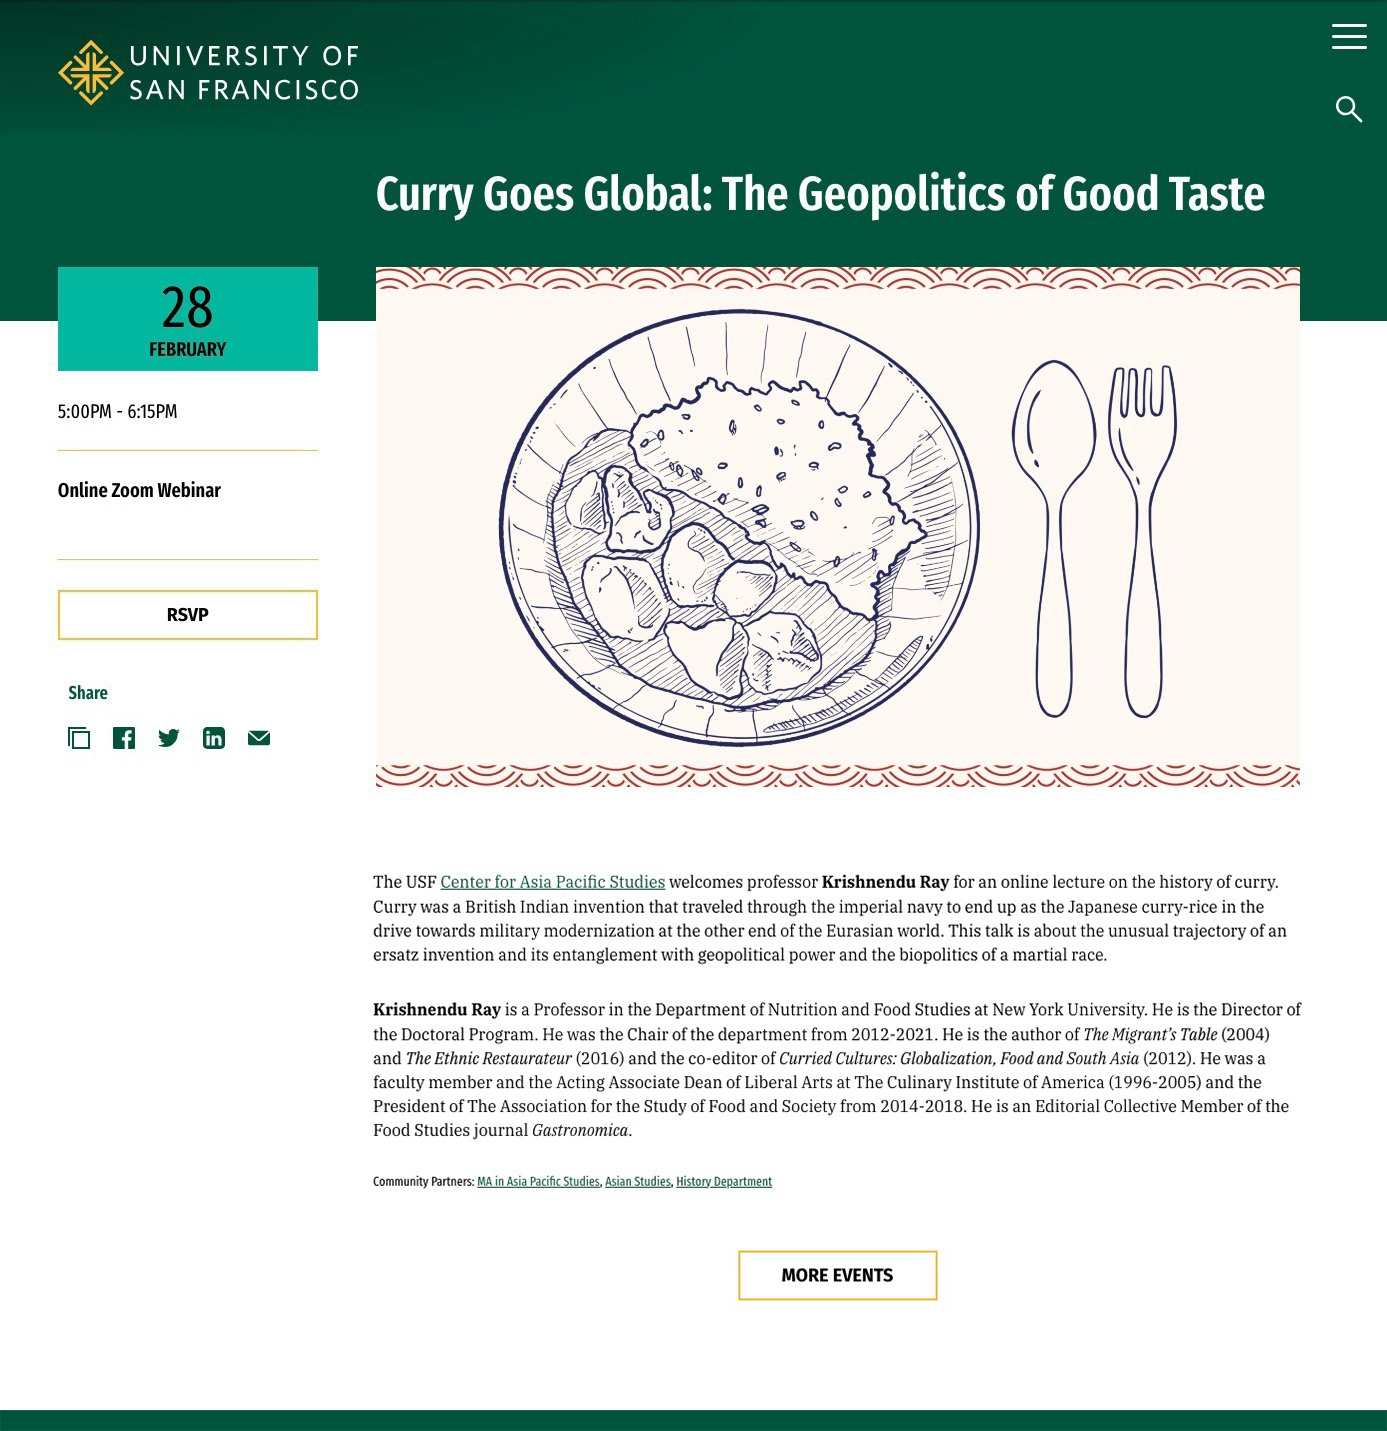 Sample Event: Curry Goes Global